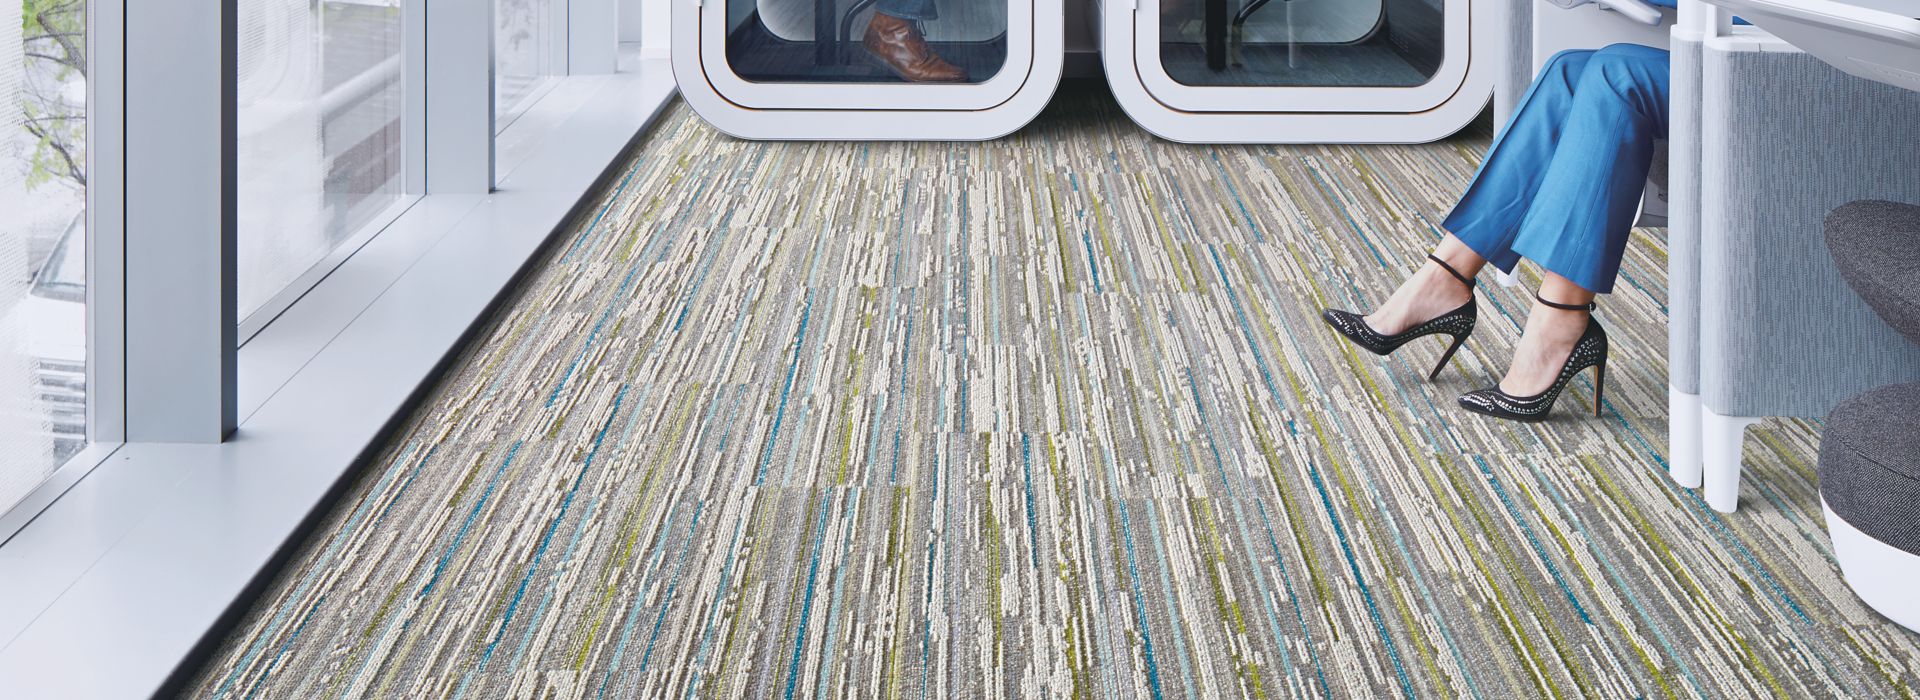 Interface Video Spectrum carpet tile in office common area showing work spaces